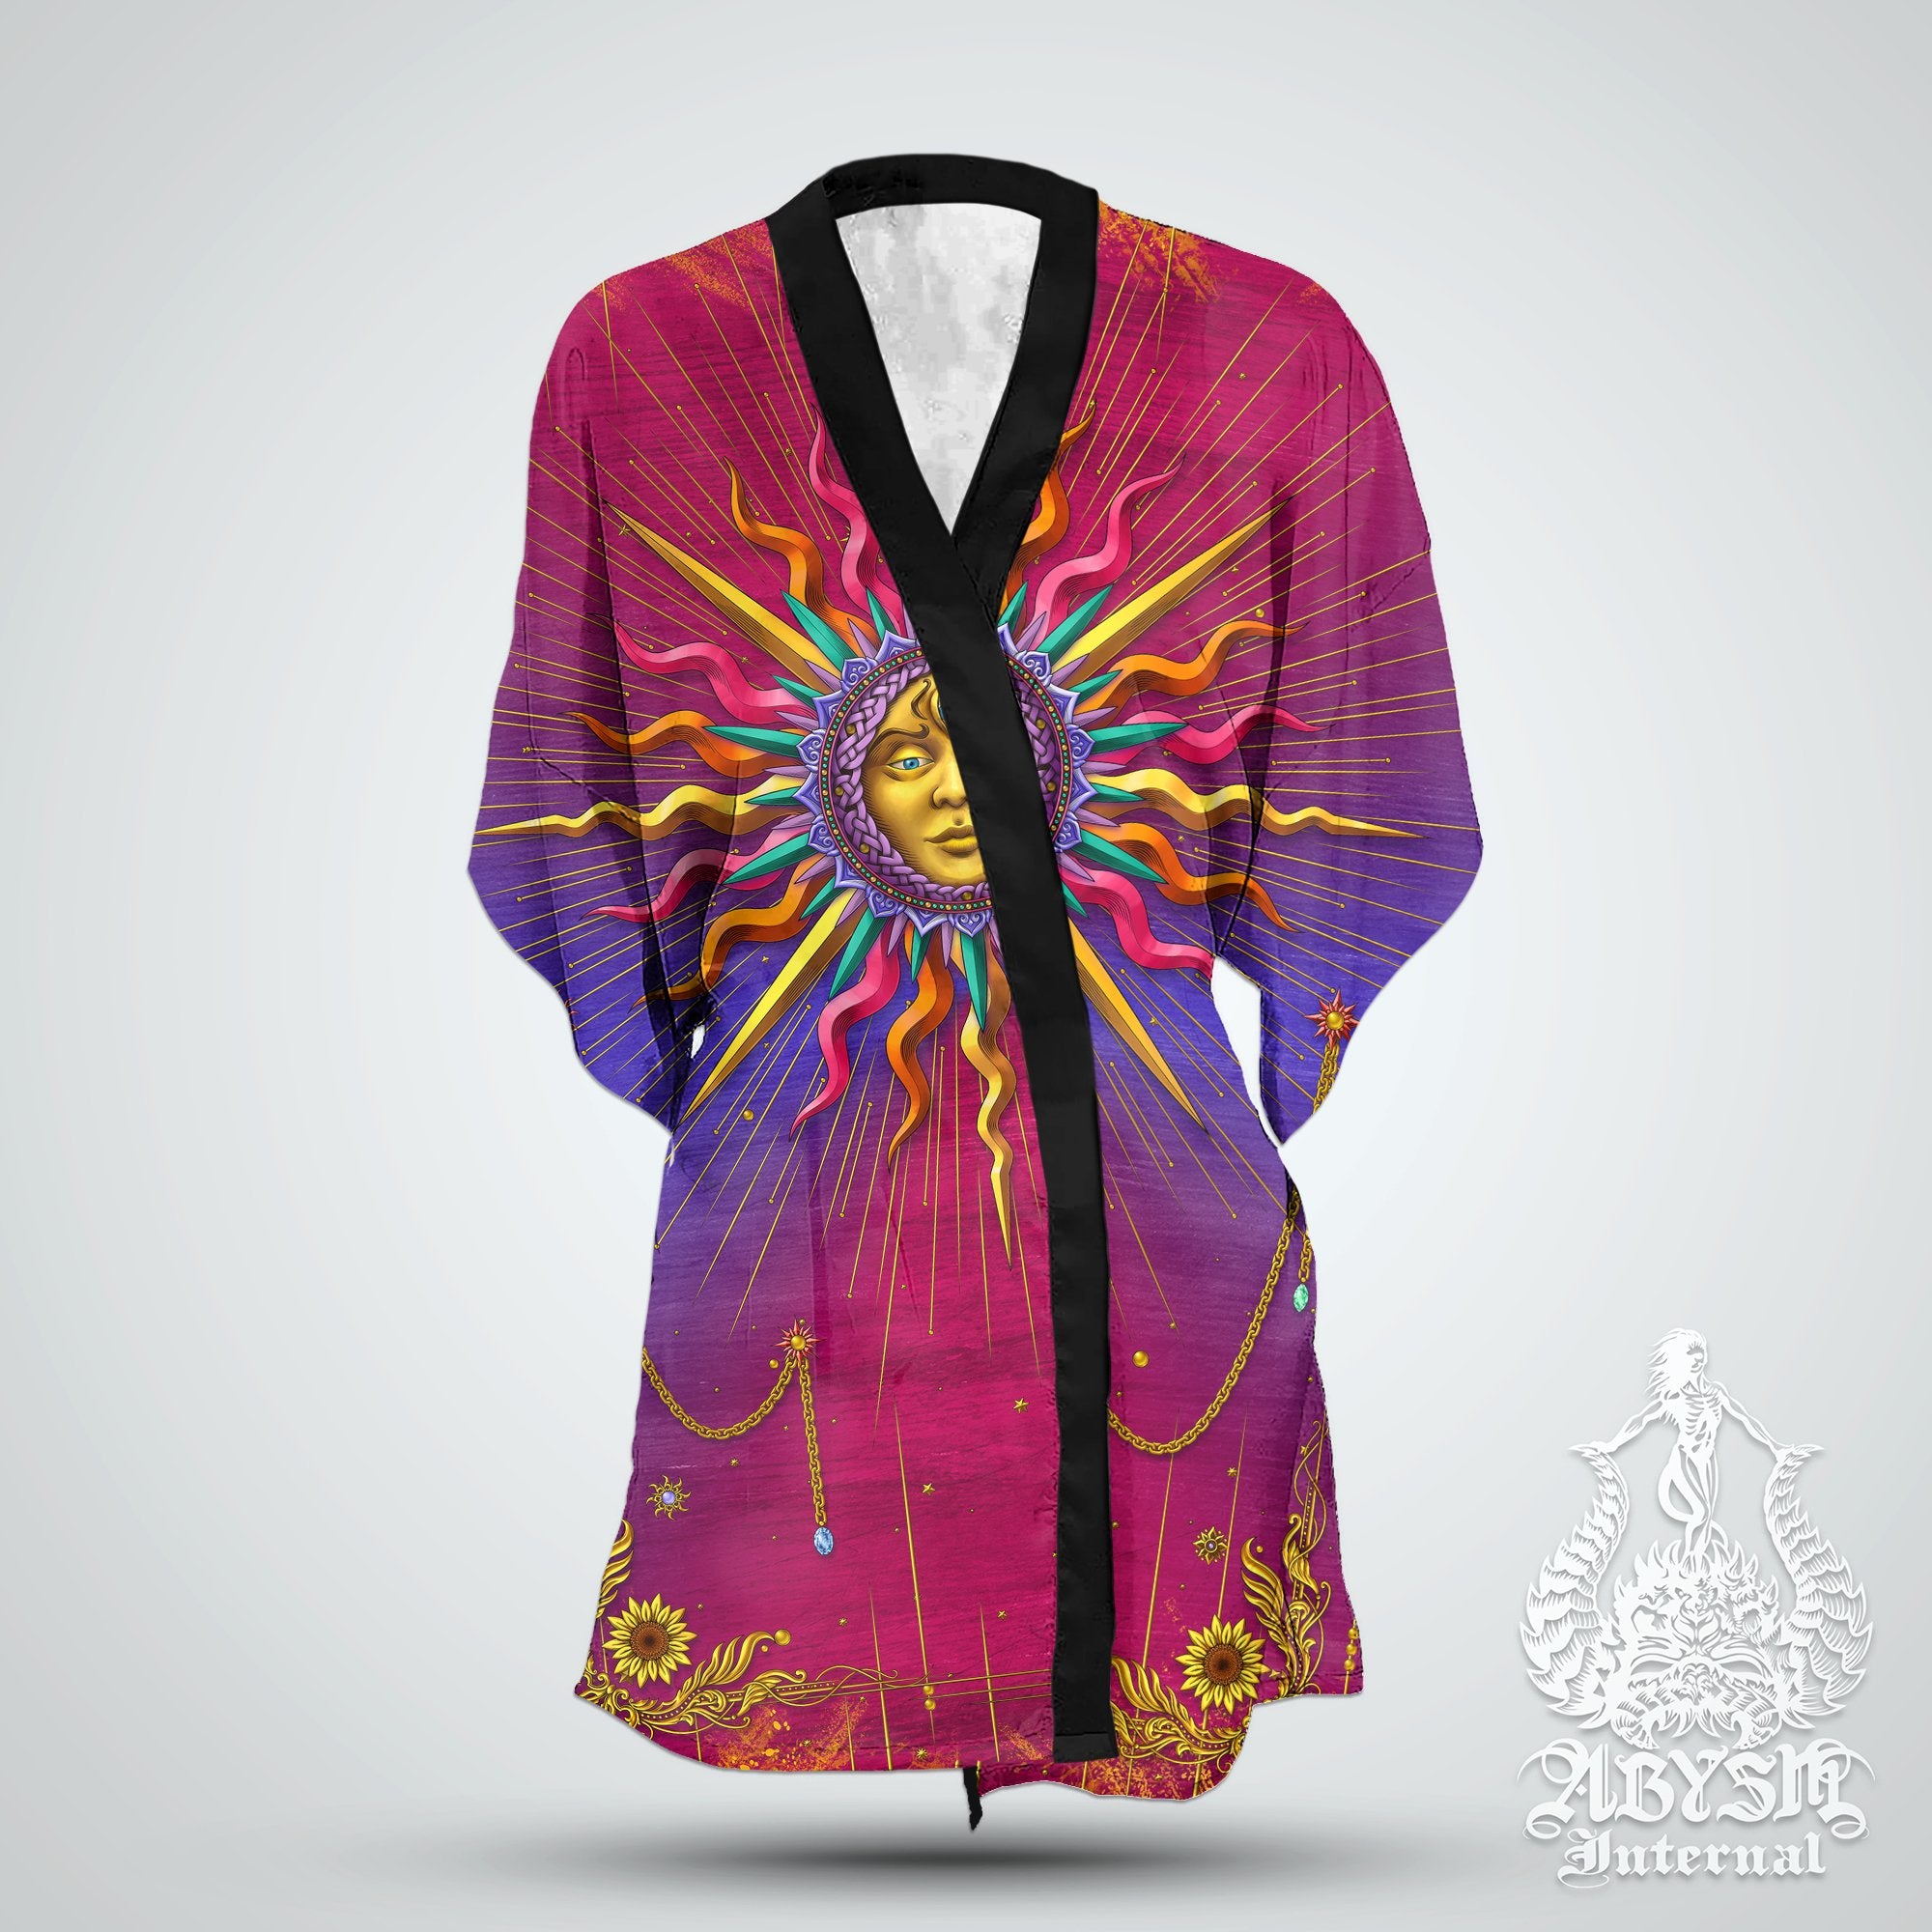 The Sun Short Kimono Robe, Trippy Beach Party Outfit, Tarot Arcana Coverup, Psychedelic Summer Festival, Rave Clothing, Unisex - Psy - Abysm Internal